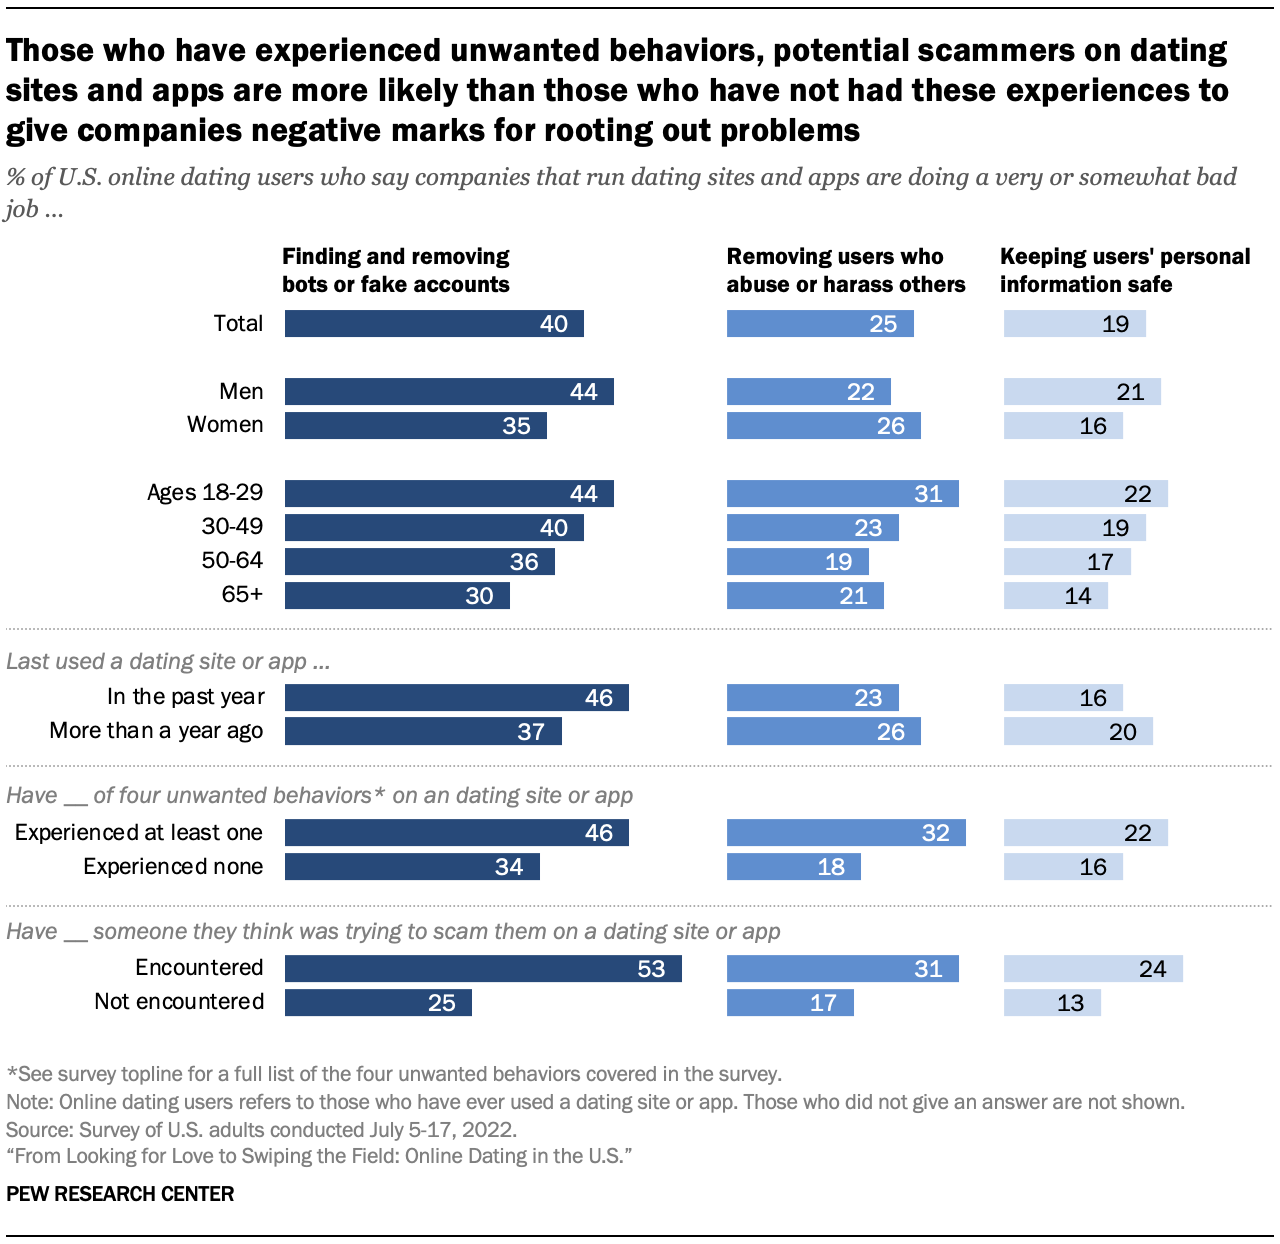 Those who have experienced unwanted behaviors, potential scammers on dating sites and apps are more likely than those who have not had these experiences to give companies negative marks for rooting out problems